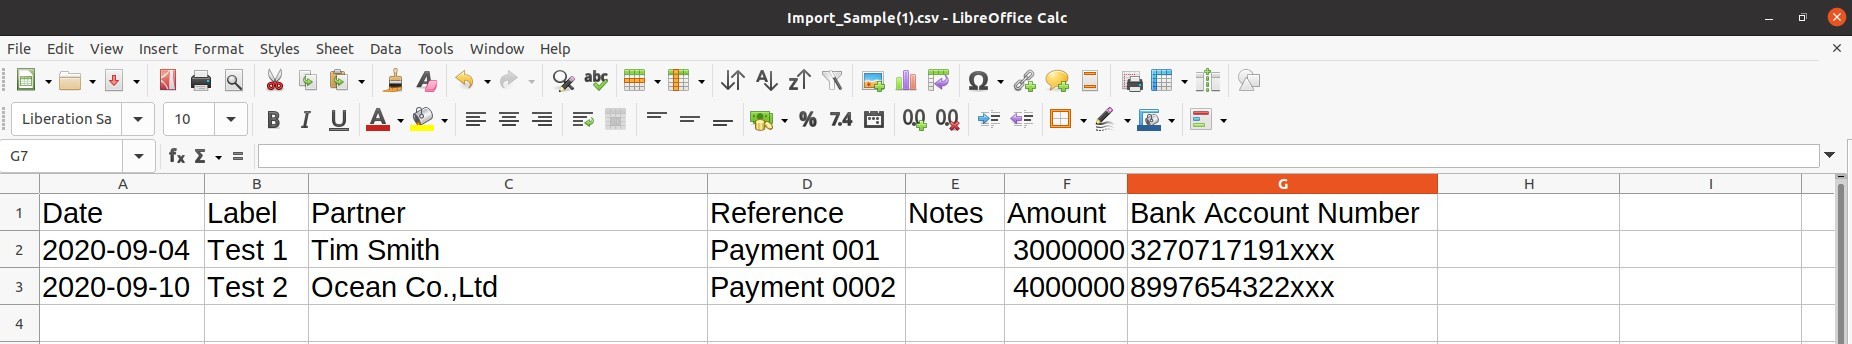 Add data to the import sample template